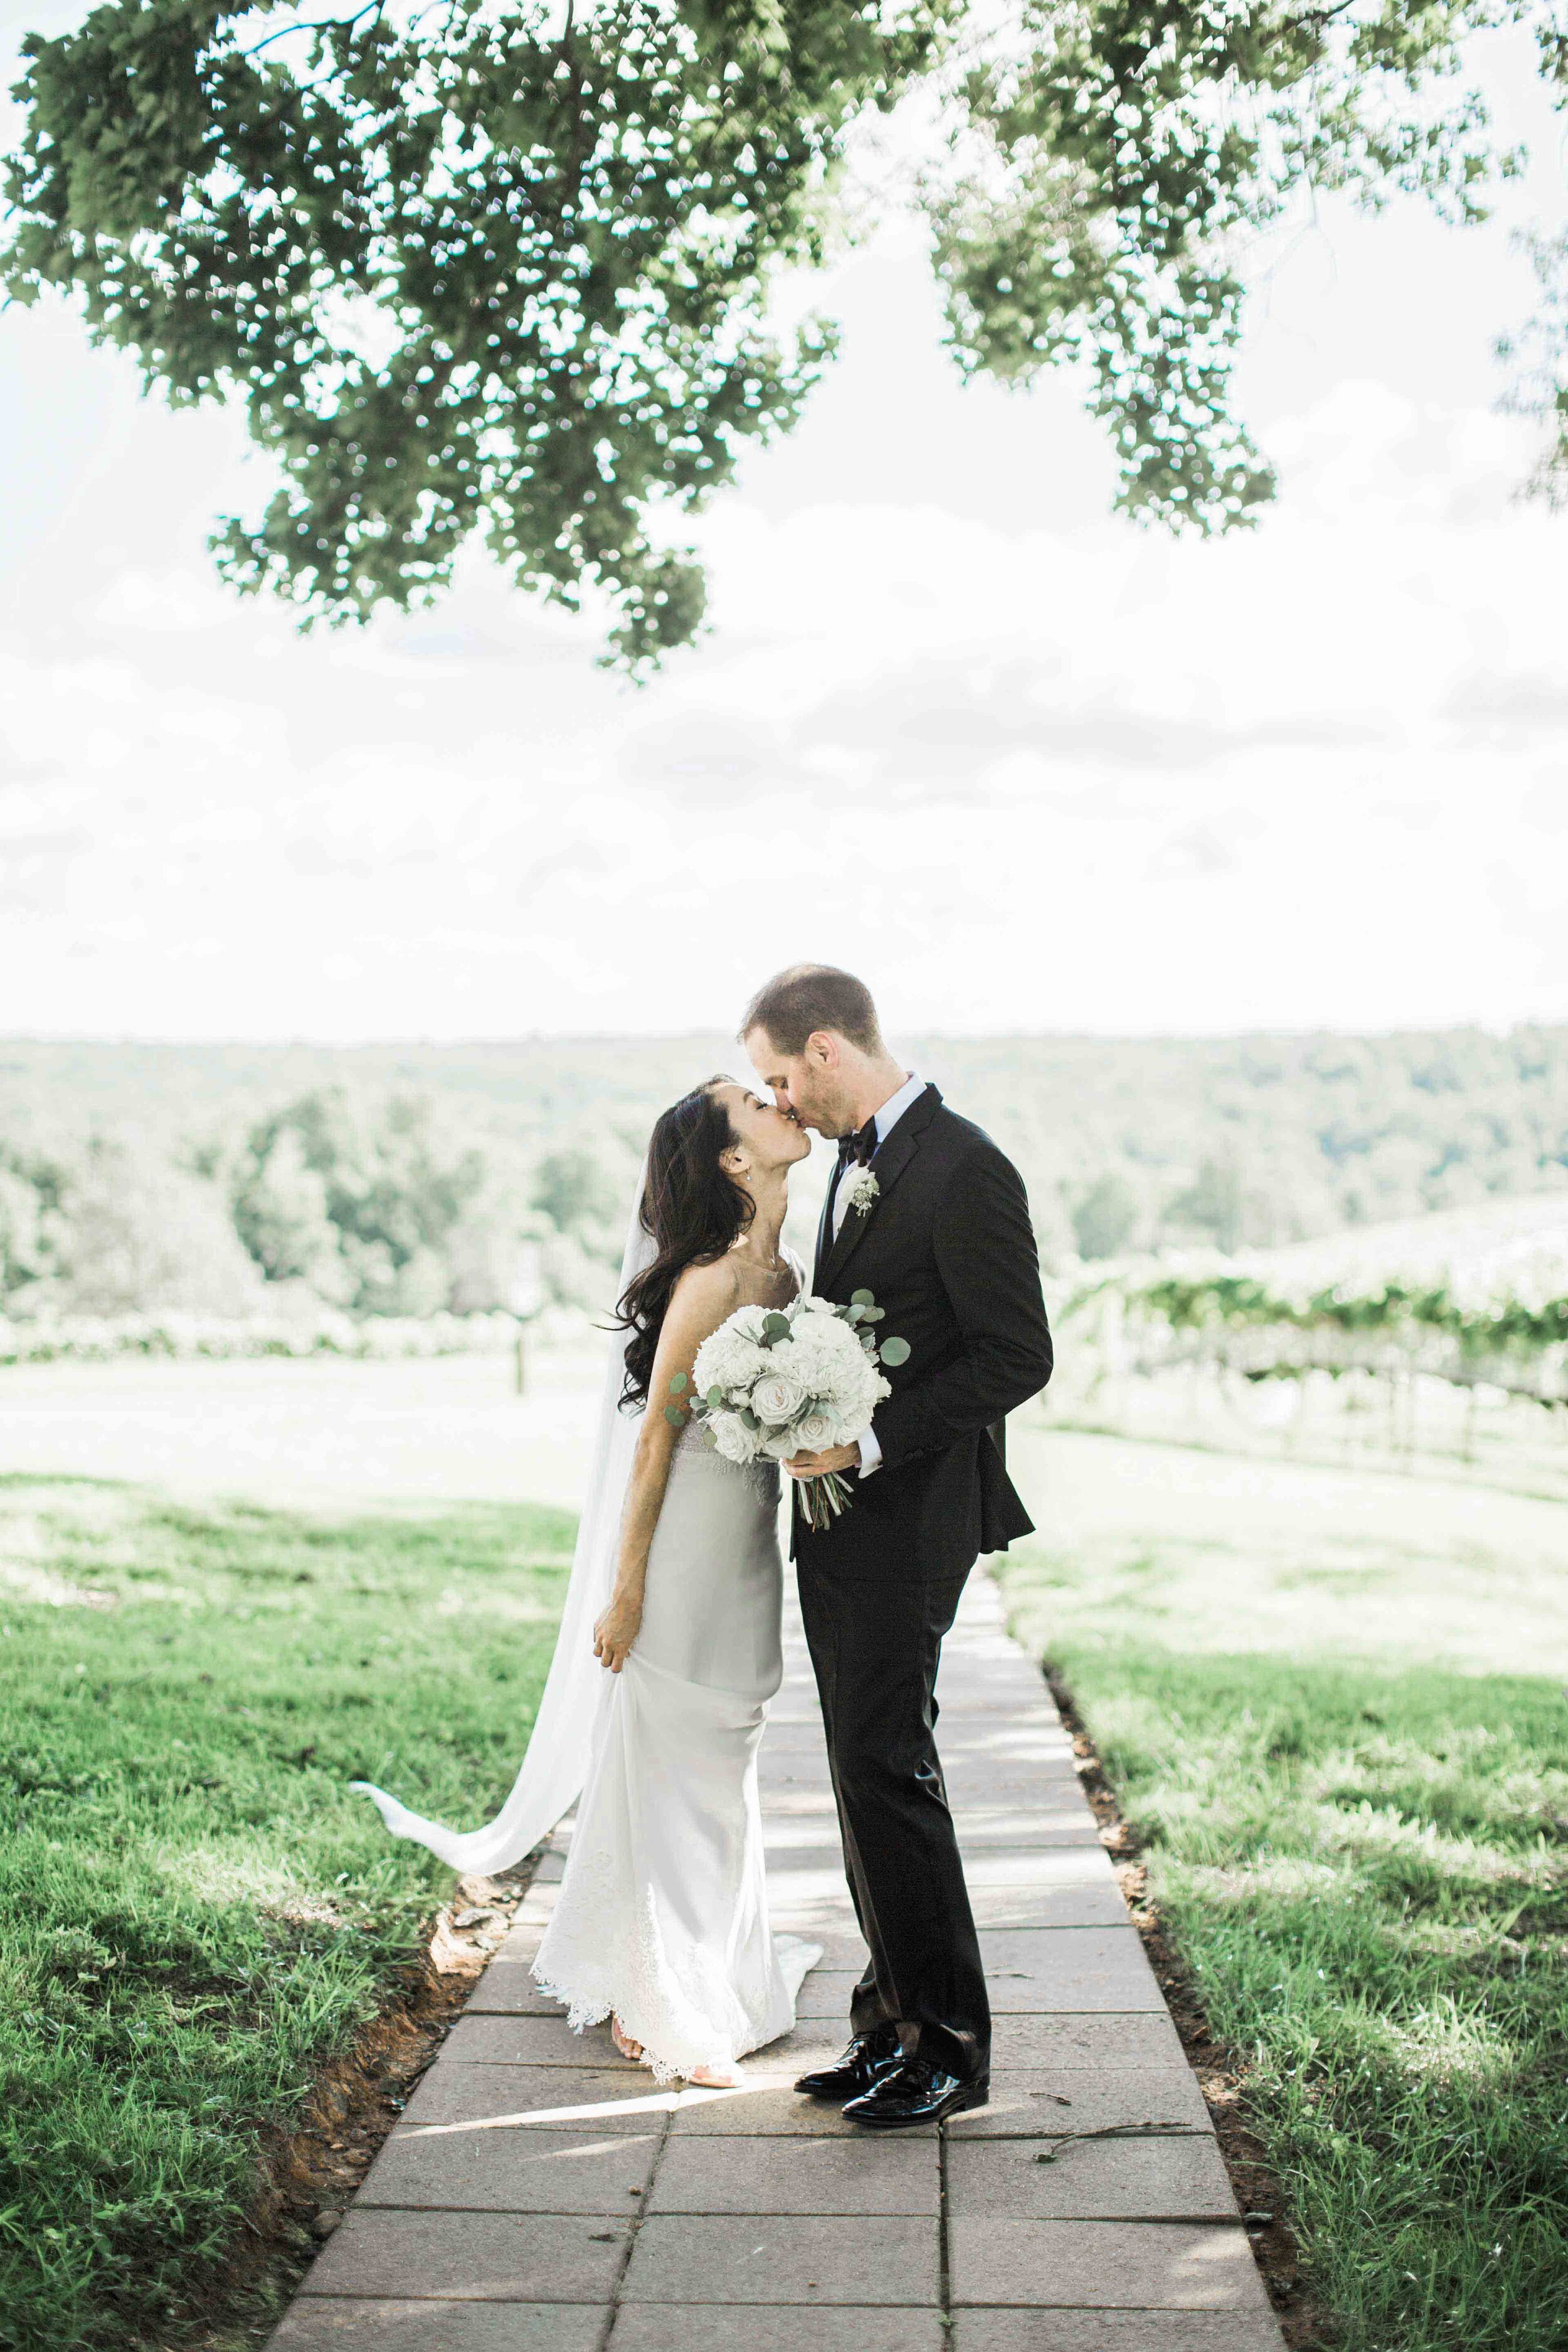 Gorgeous Vineyard with bride and groom  